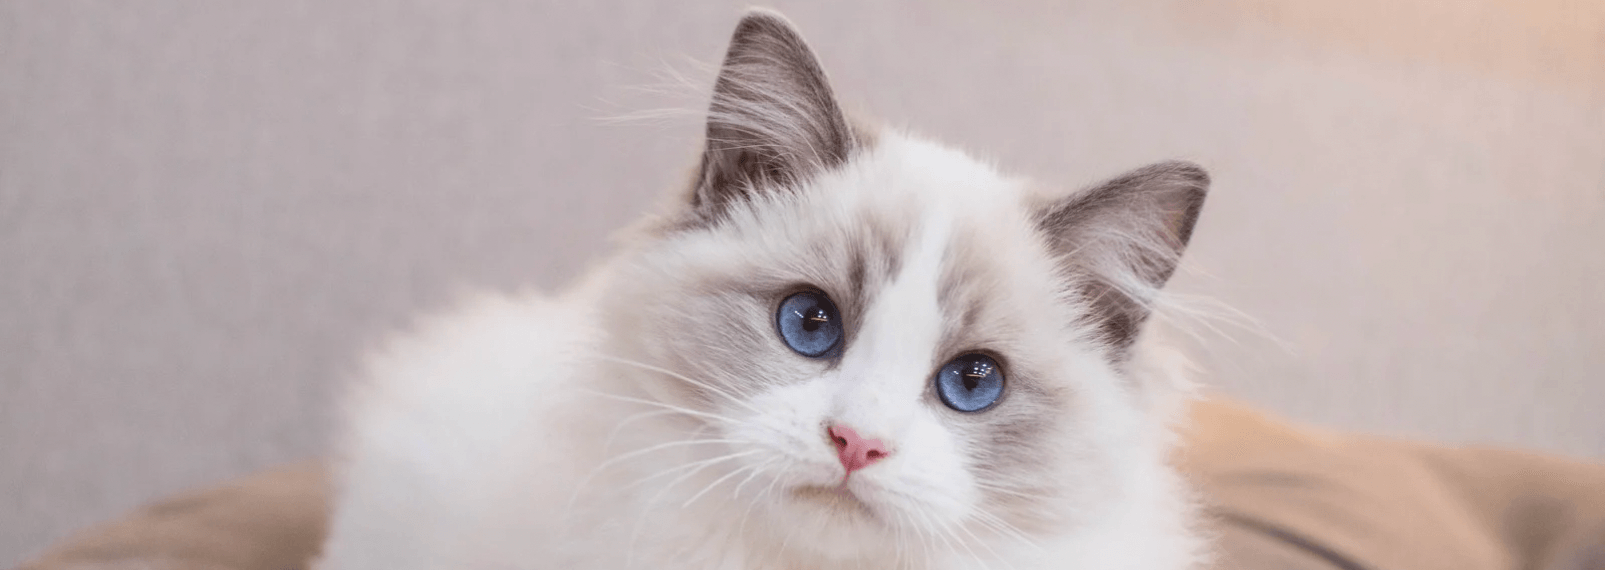 What Can I Give My Cat As Treats? - Petsy